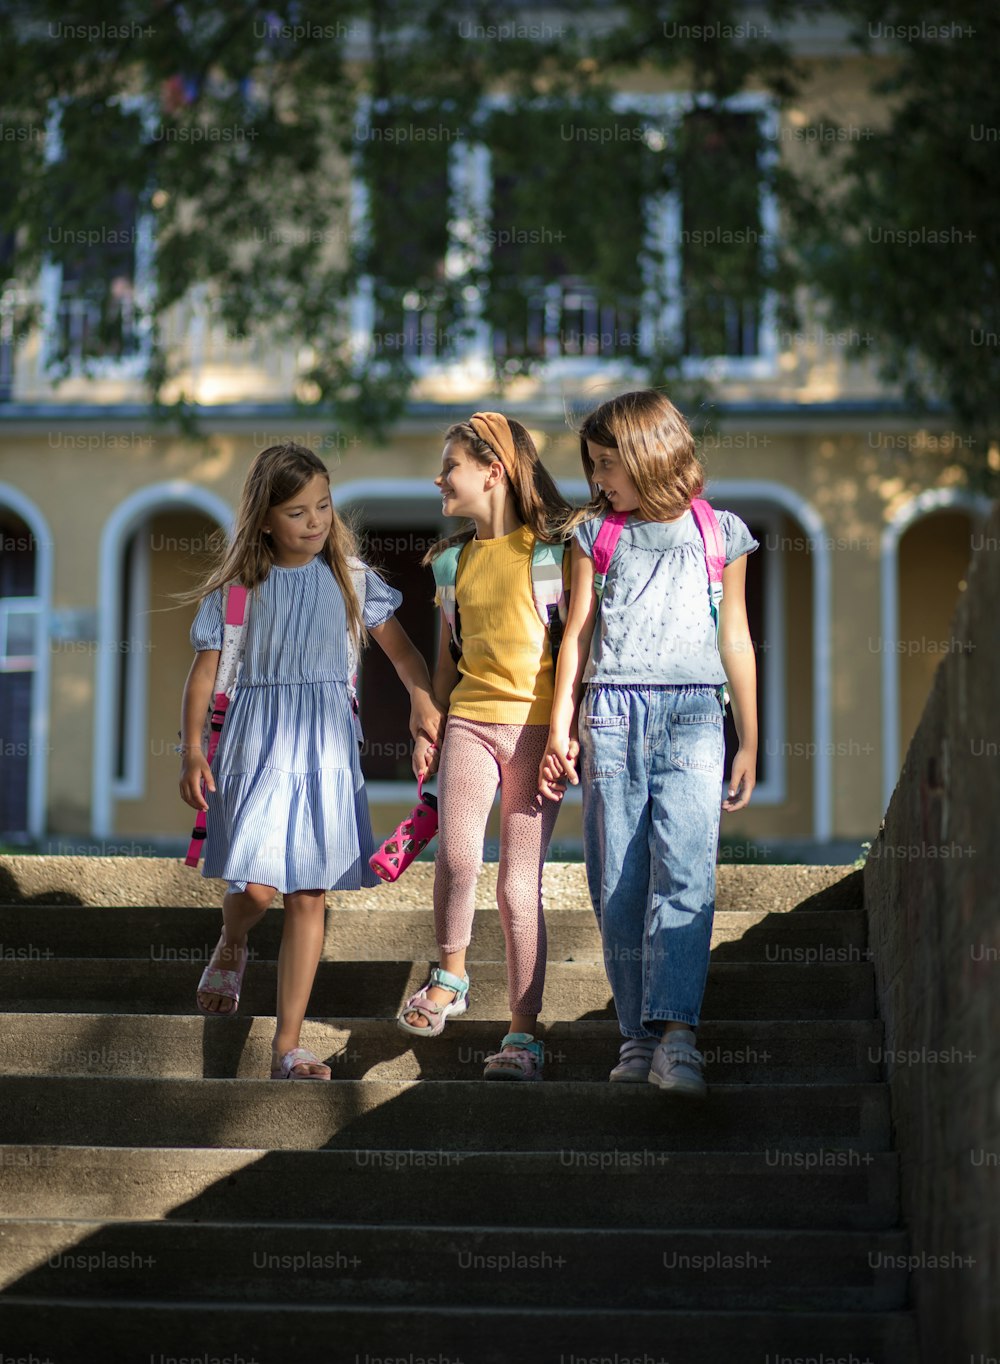 The three girls return from school together.